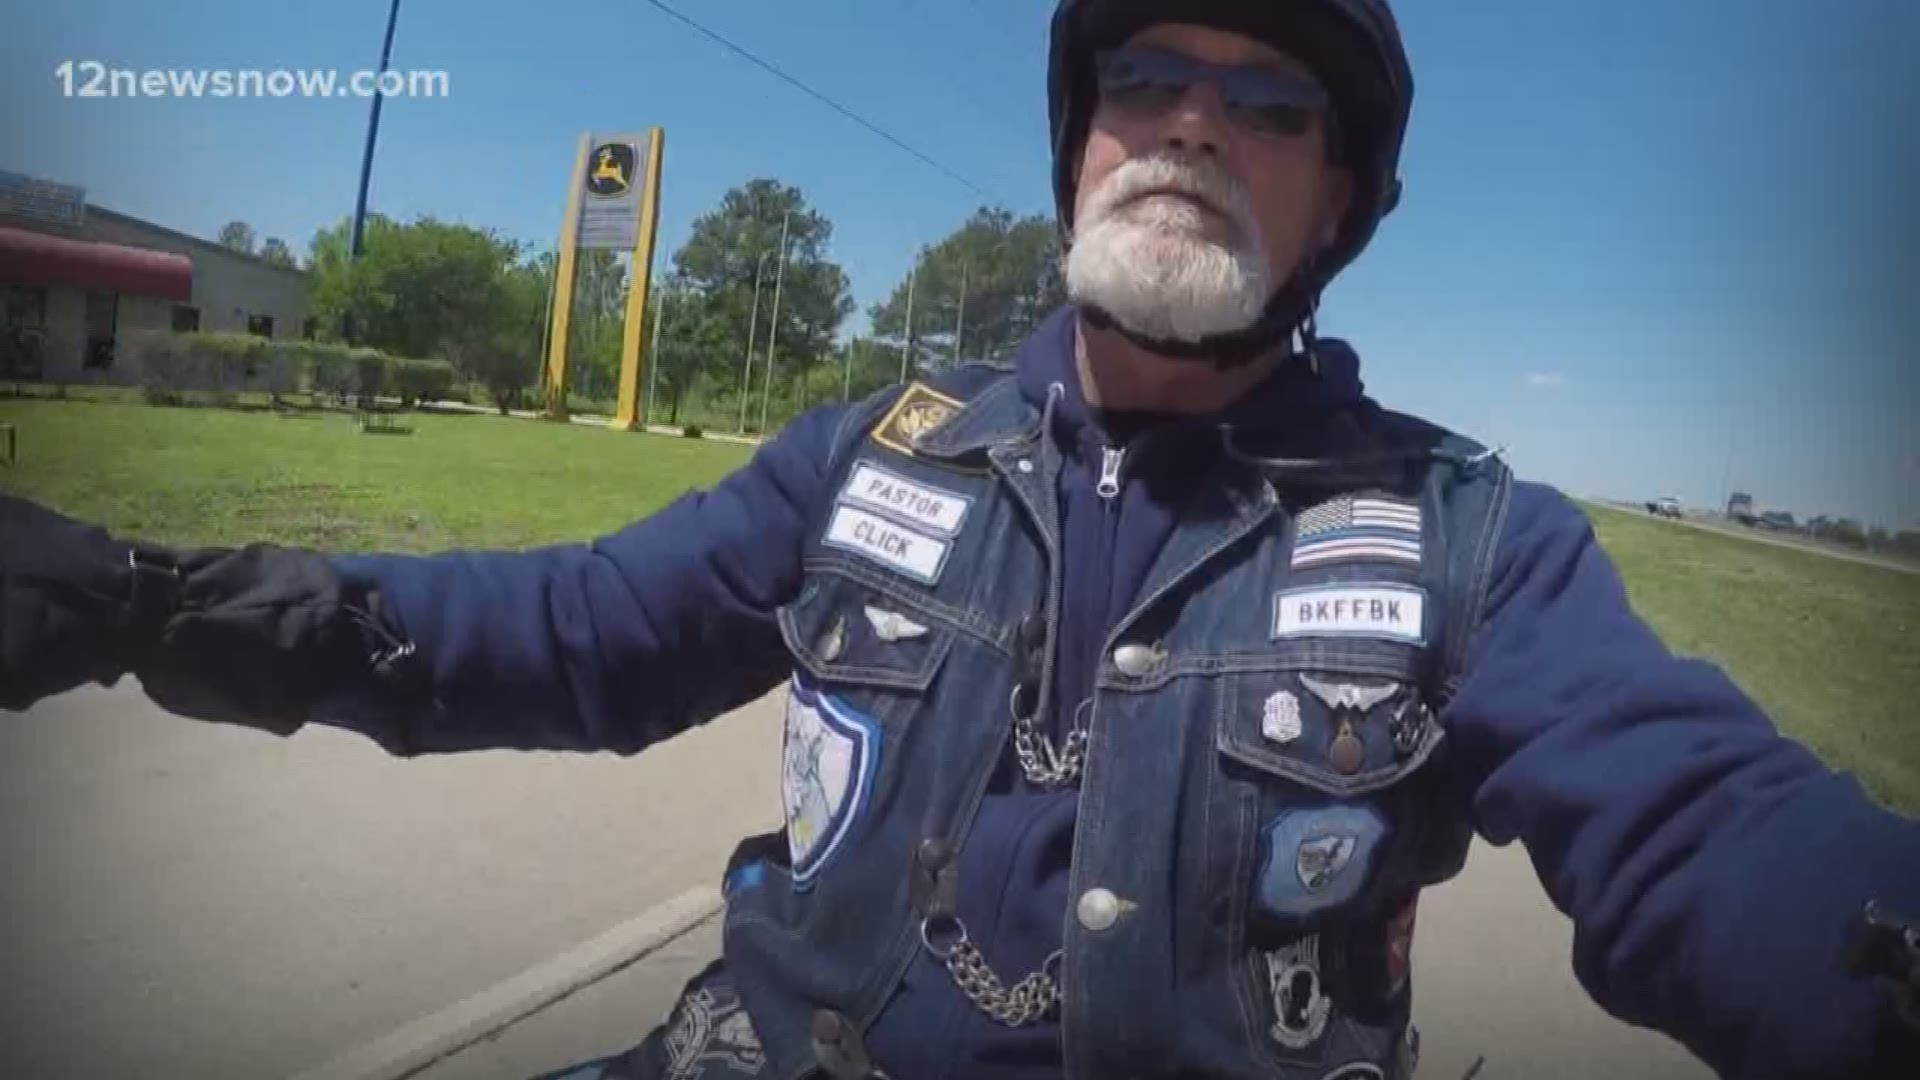 In the last month Southeast Texas has seen 3 motorcycle fatalities.